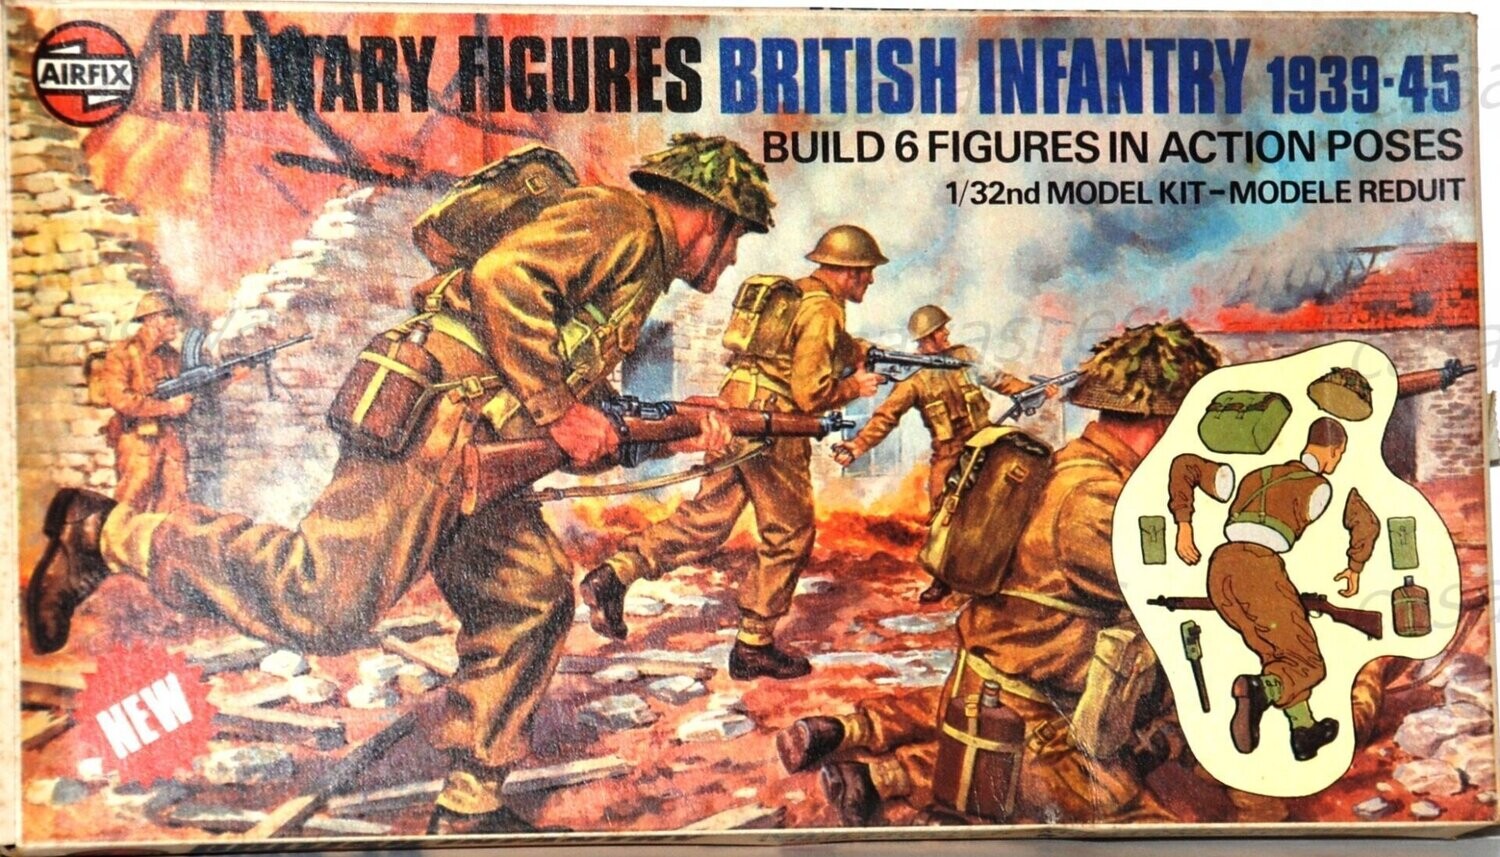 Airfix - 1977 - S4-04585-8 - British Infantry 1935-45 1/32
Build 6 Figure in Action Poses
Military Figures 1/32
Boz Size 26 x 14 cm.